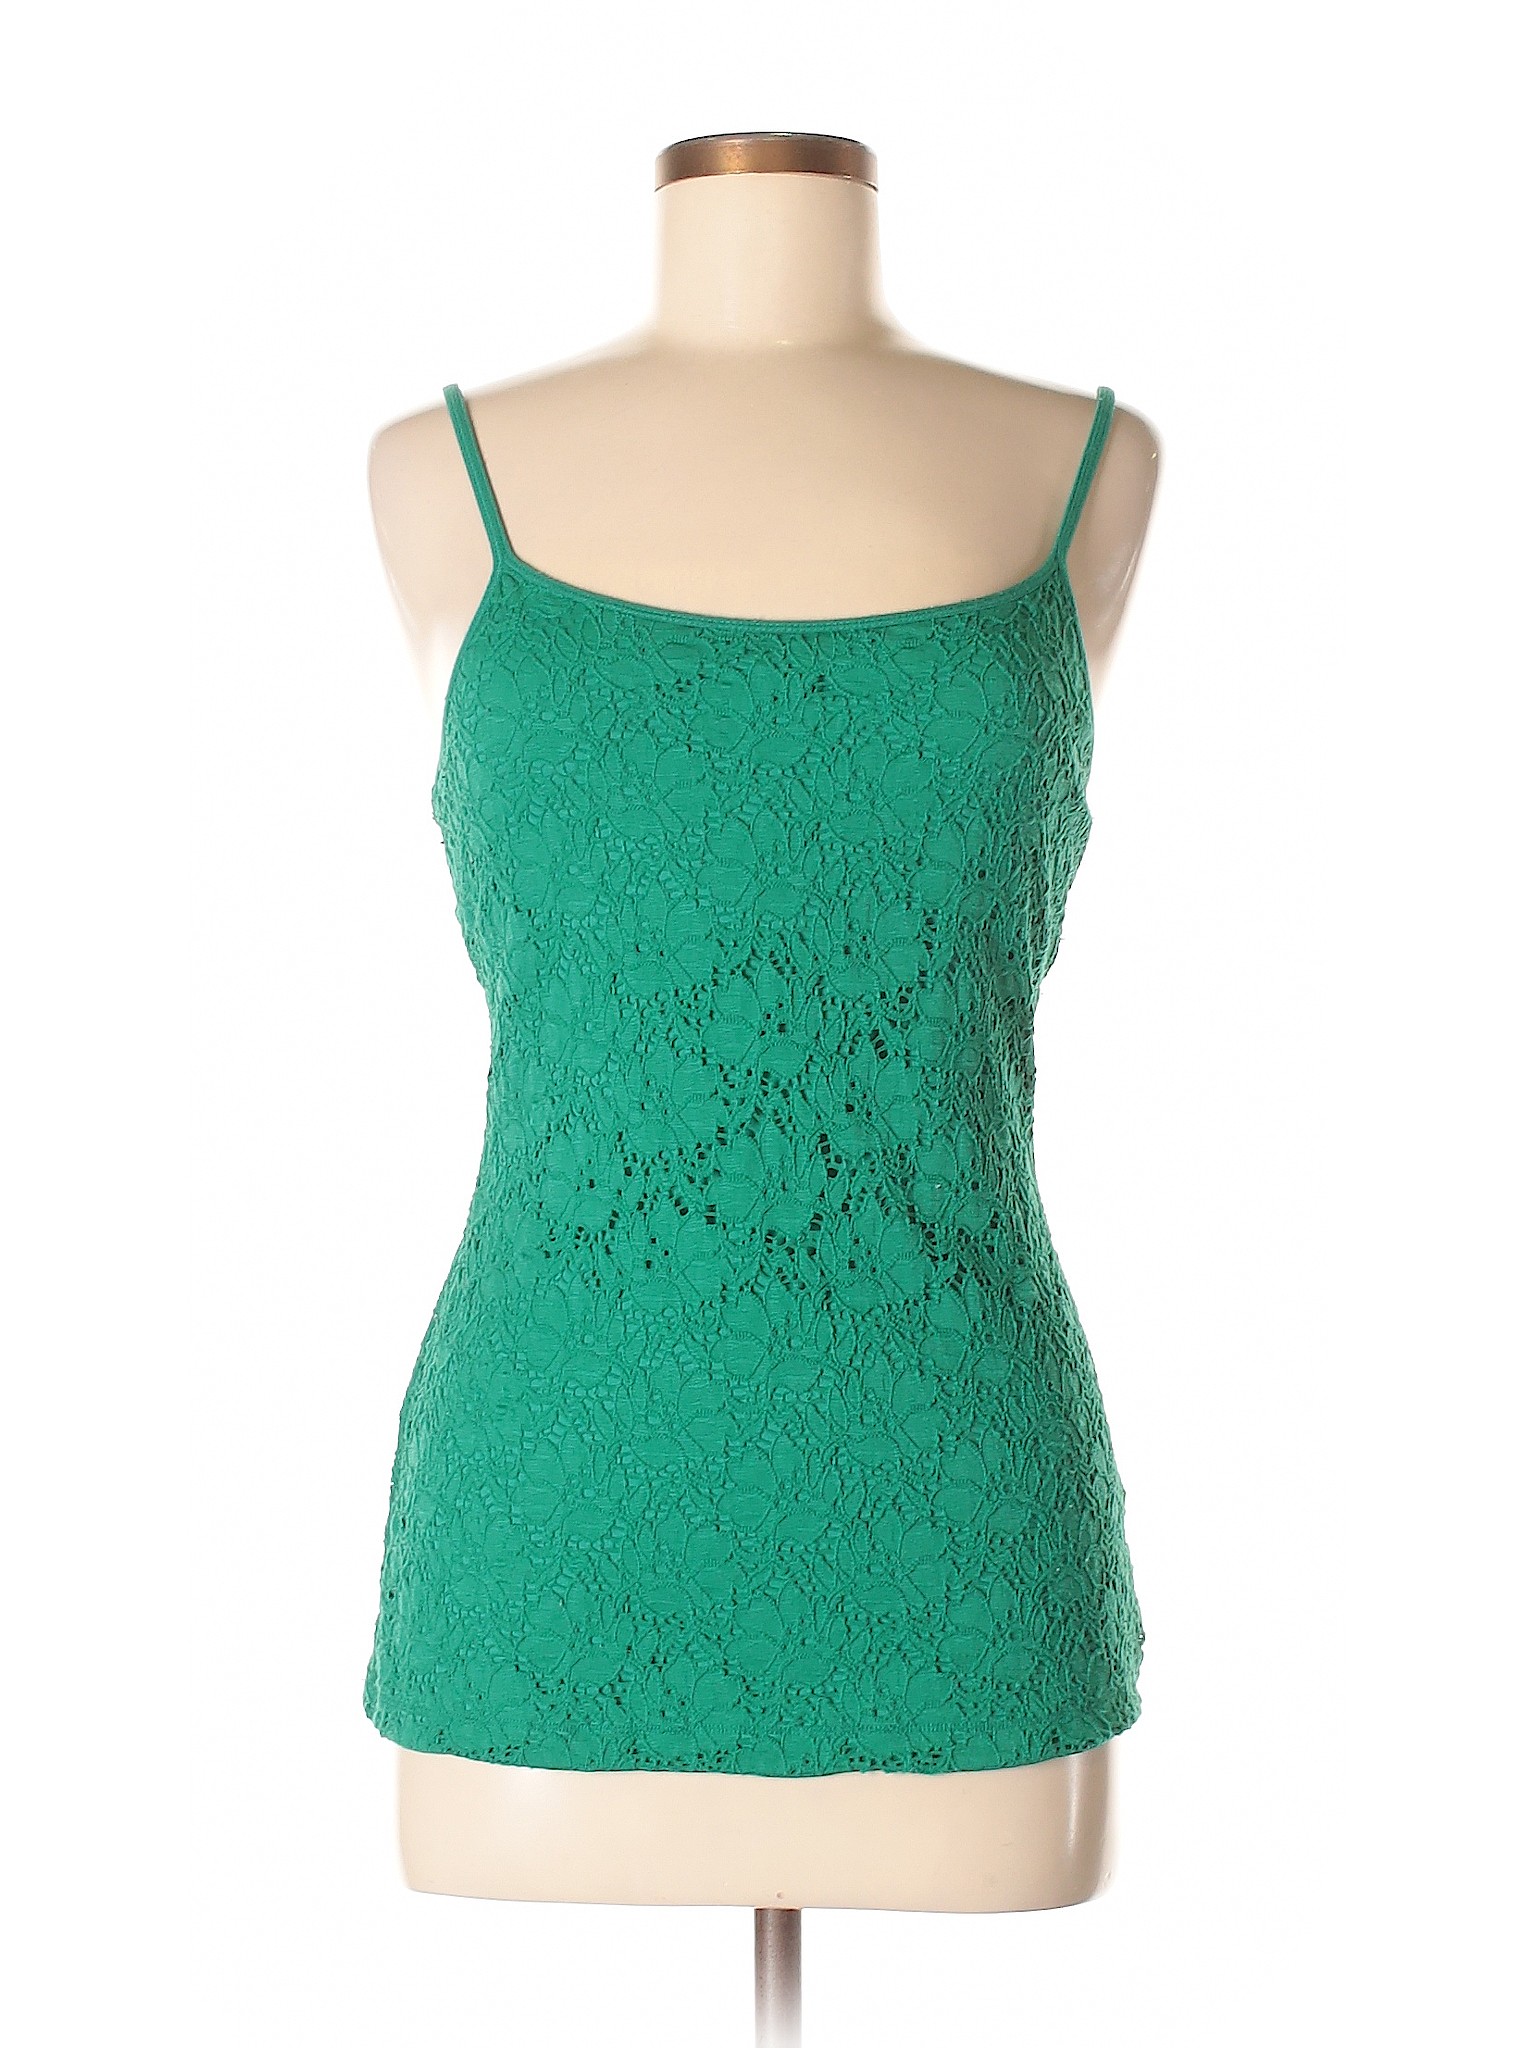 Express Lace Green Tank Top Size M - 80% off | thredUP